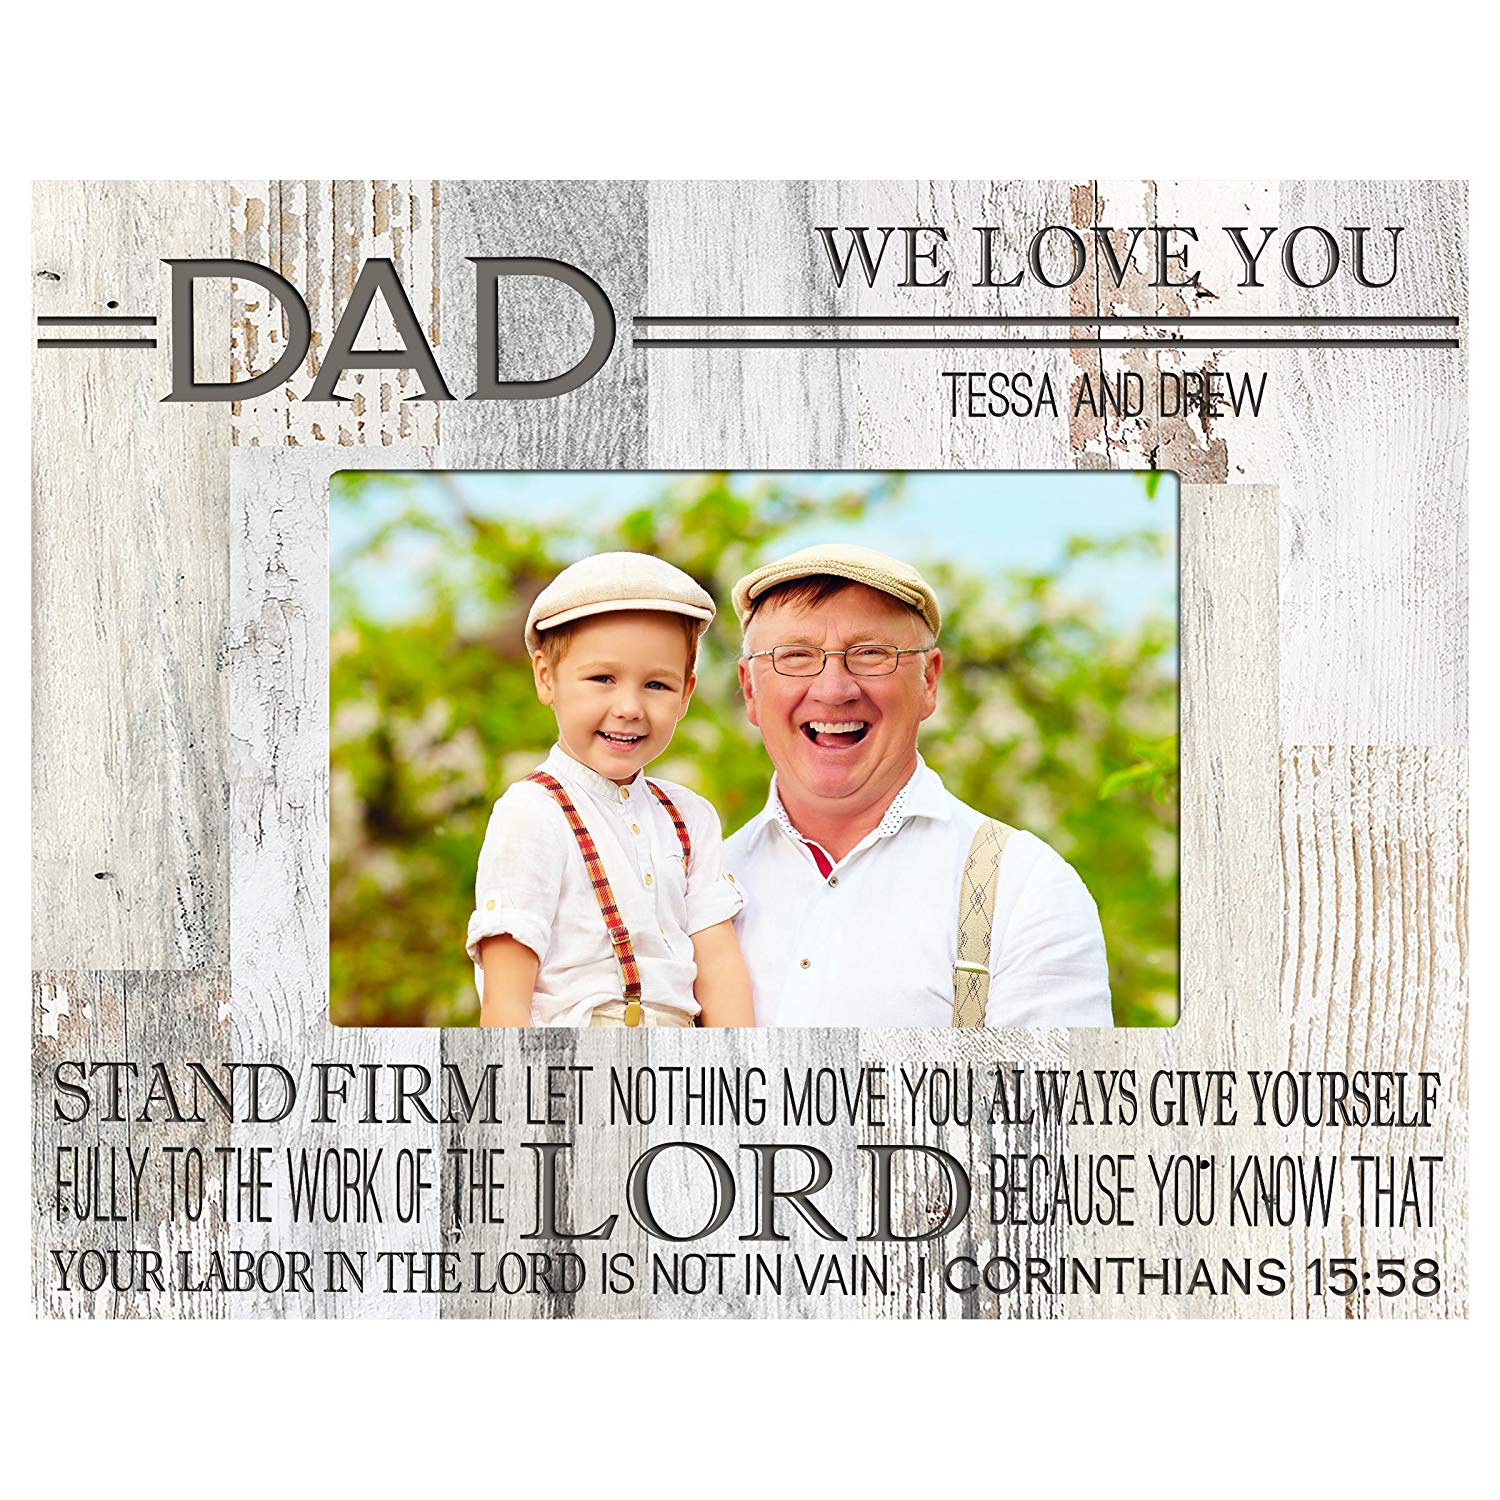 Personalized Engraved Birthday Picture Frame Gift for Dad - 1 Corinthians 15:58 - LifeSong Milestones